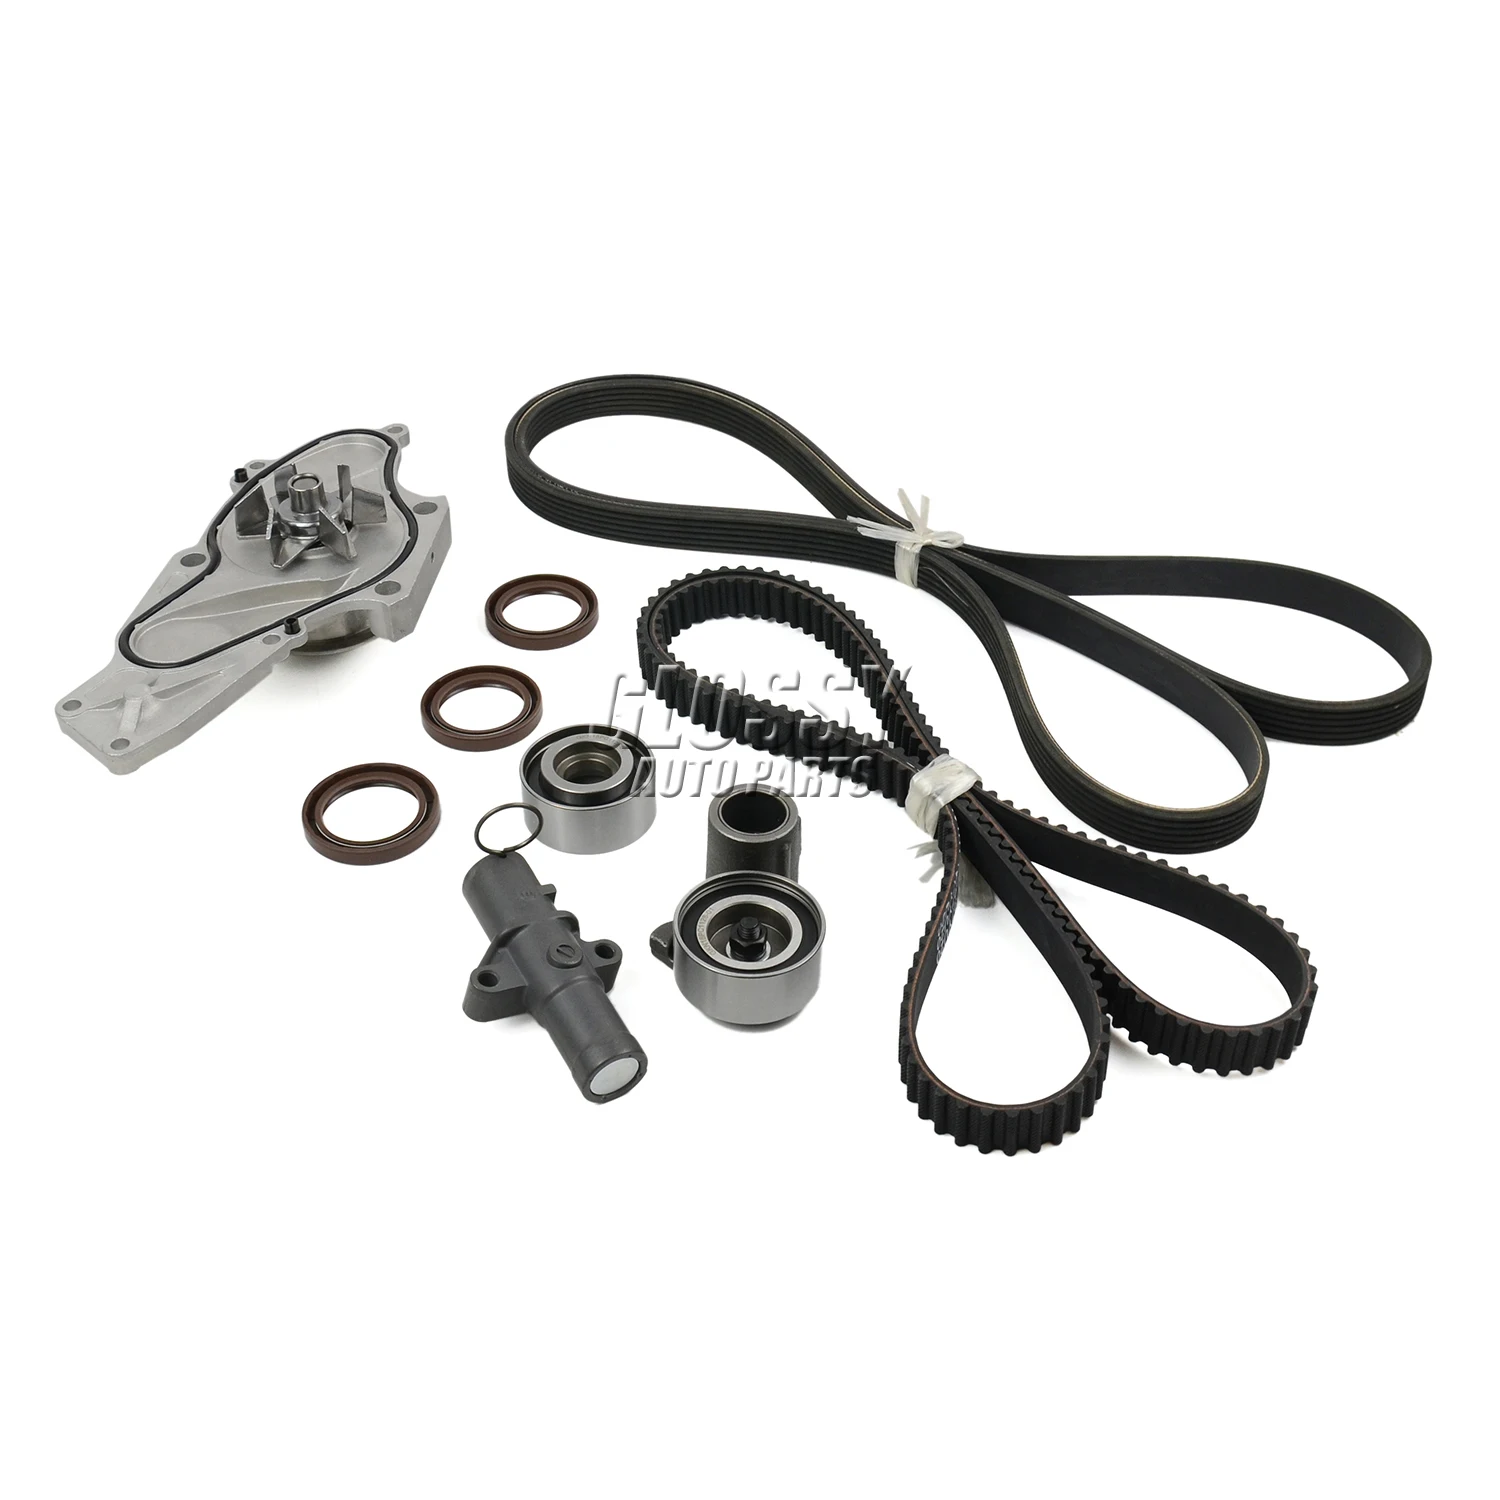 

AP03 Timing Belt Kit with Water Pump & Tensioner Fit for HONDA Acura Accord Odyssey RL MDX TL V6 14520-RCA-A01 19200-RDV-J01